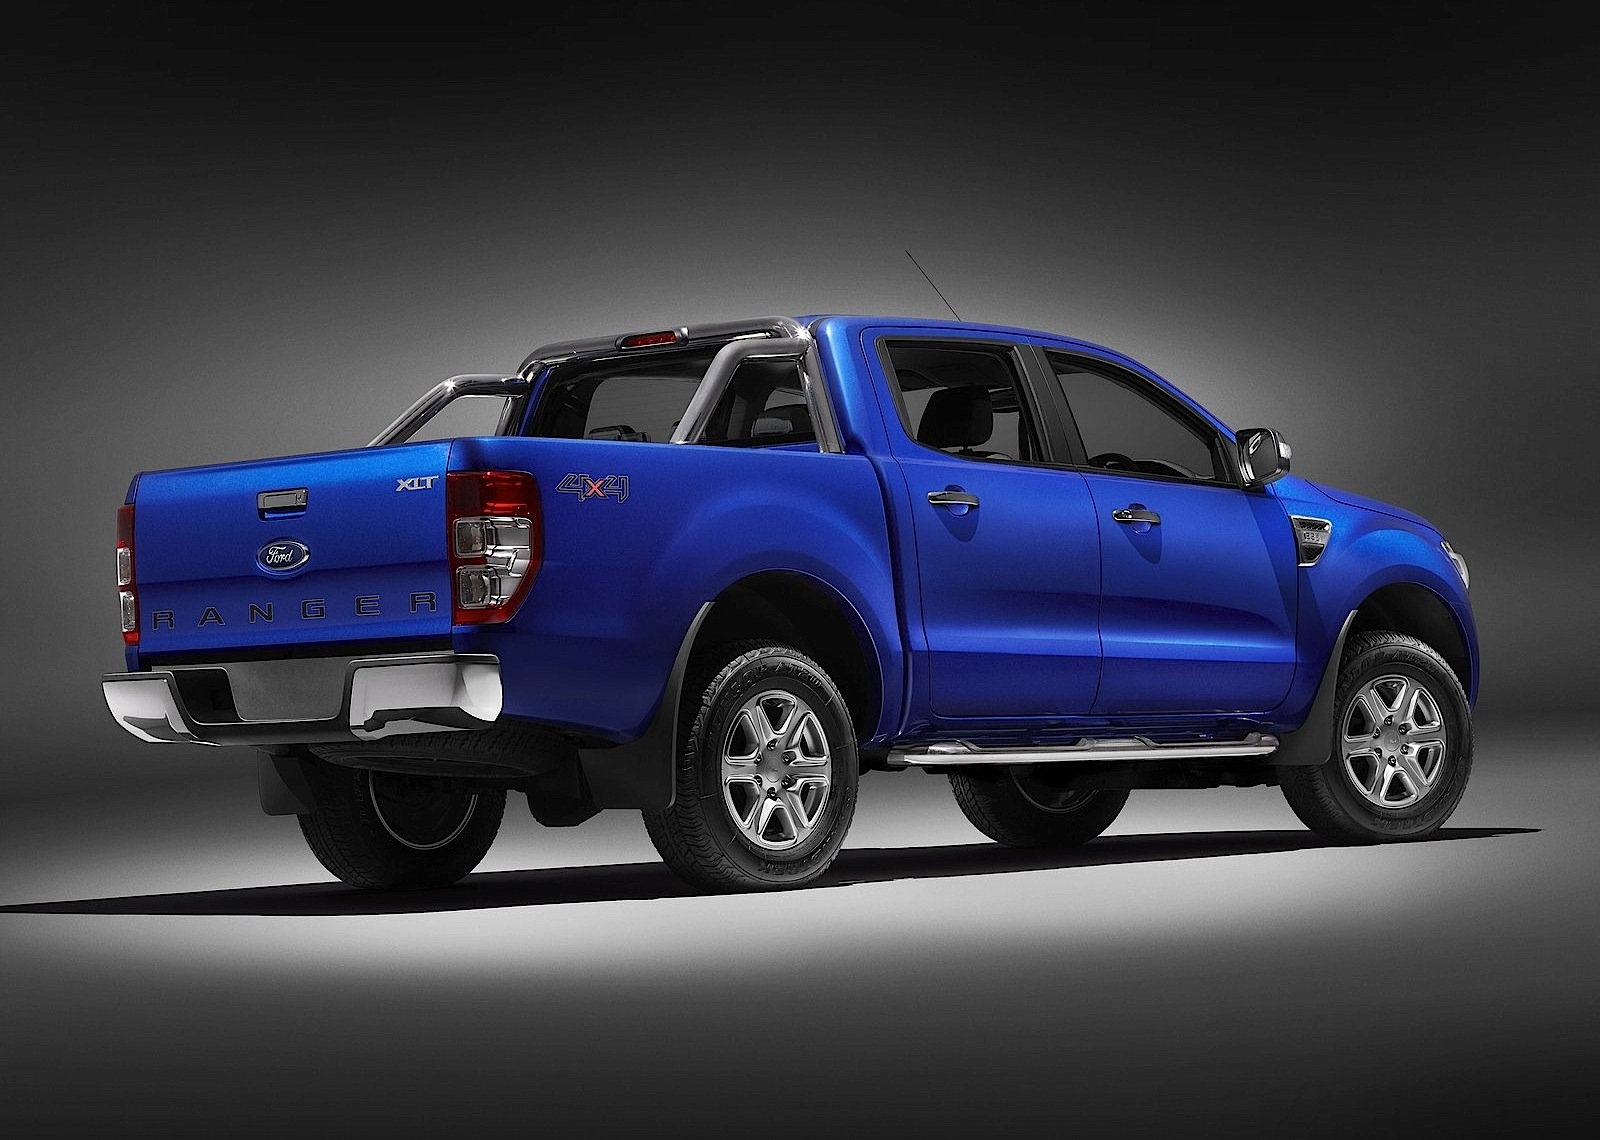 Ford Ranger Double Cab Wallpapers Vehicles Hq Ford Ranger Double Cab Pictures 4k Wallpapers 2019